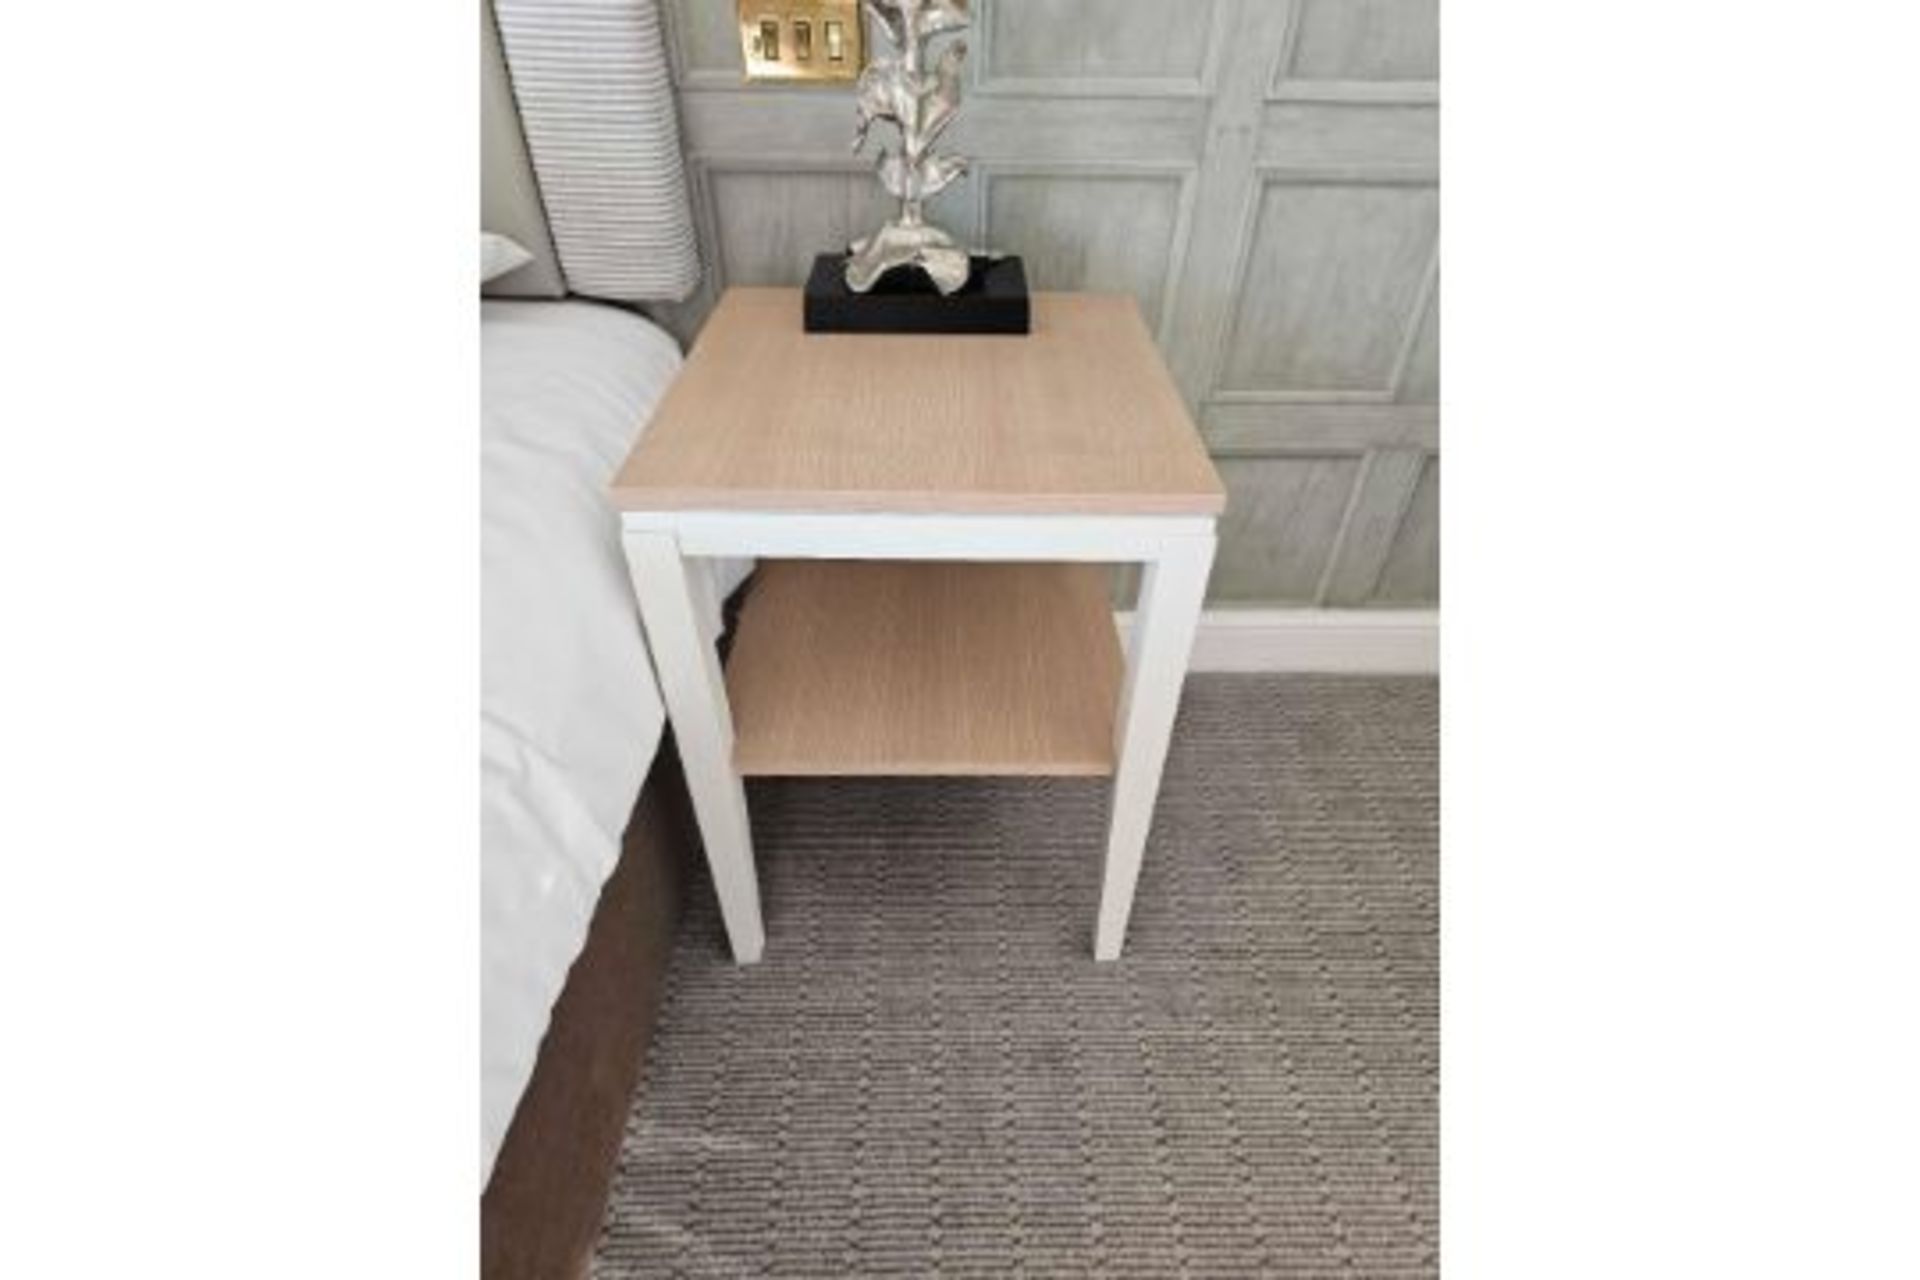 A Pair Of Side Tables A Stylish And Modern Gardenia White Painted Side Table With Undershelf, The